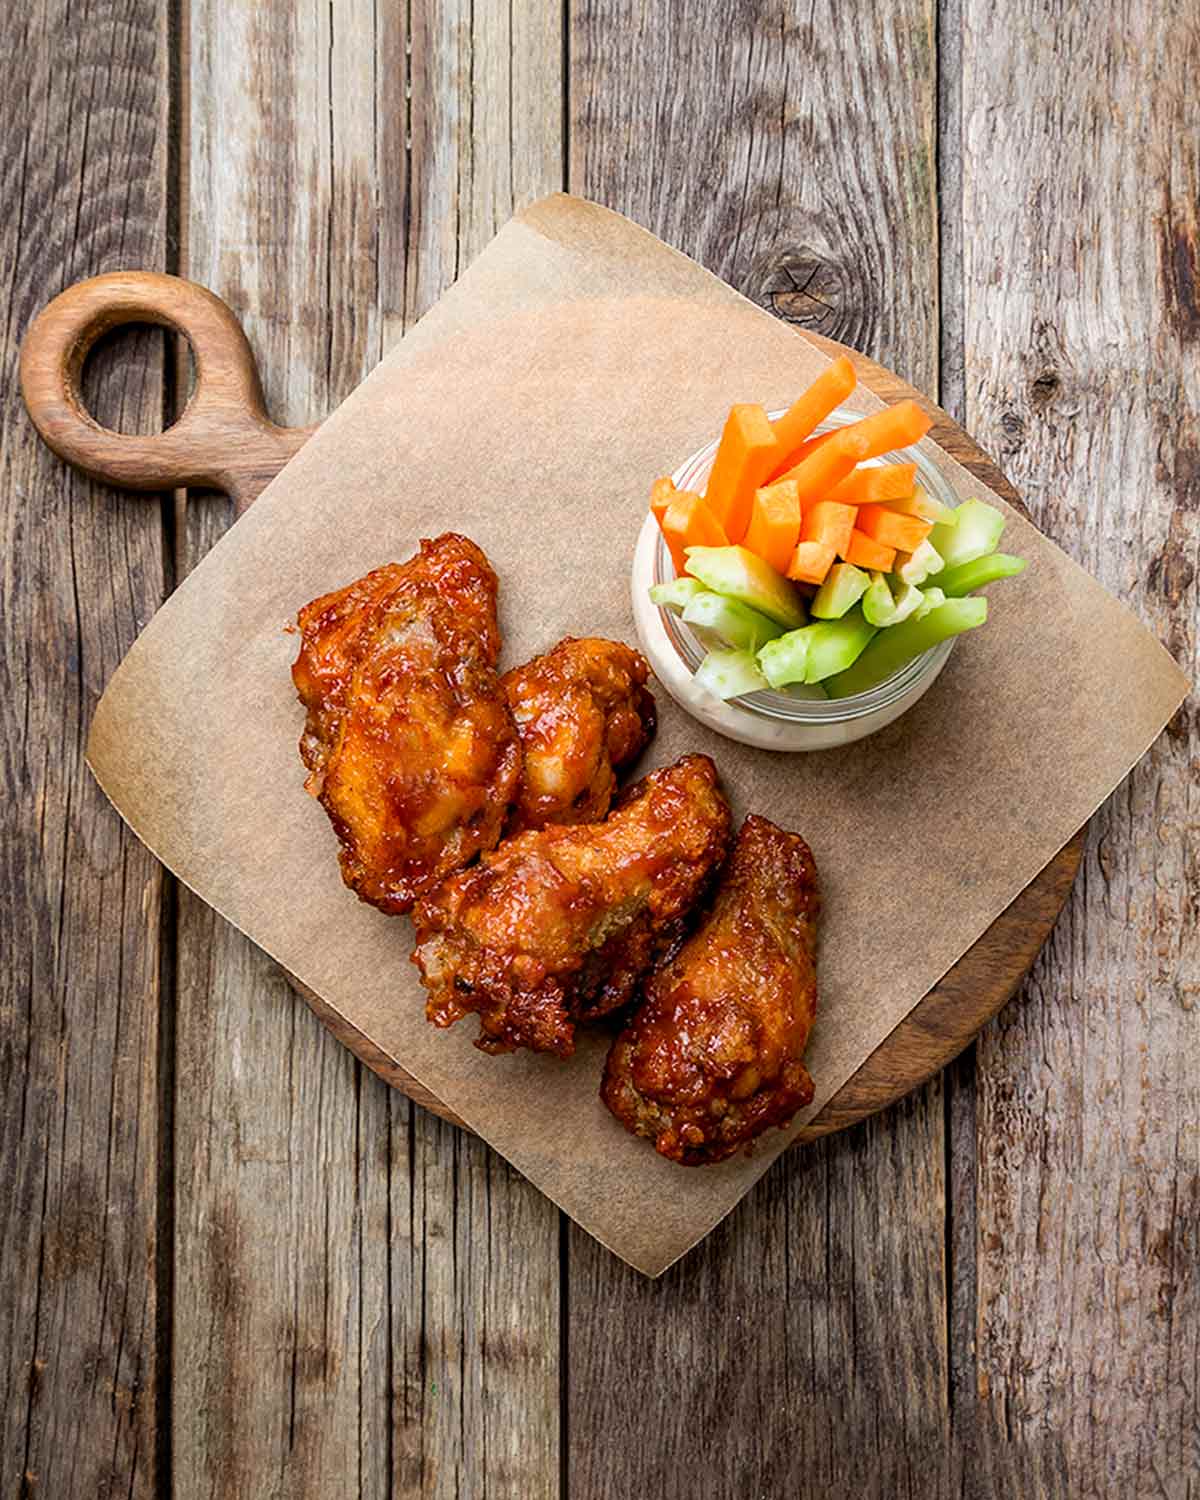 Five broiled buffalo wings on a piece of parchment on a wooden board with a bowl of carrot and celery sticks.